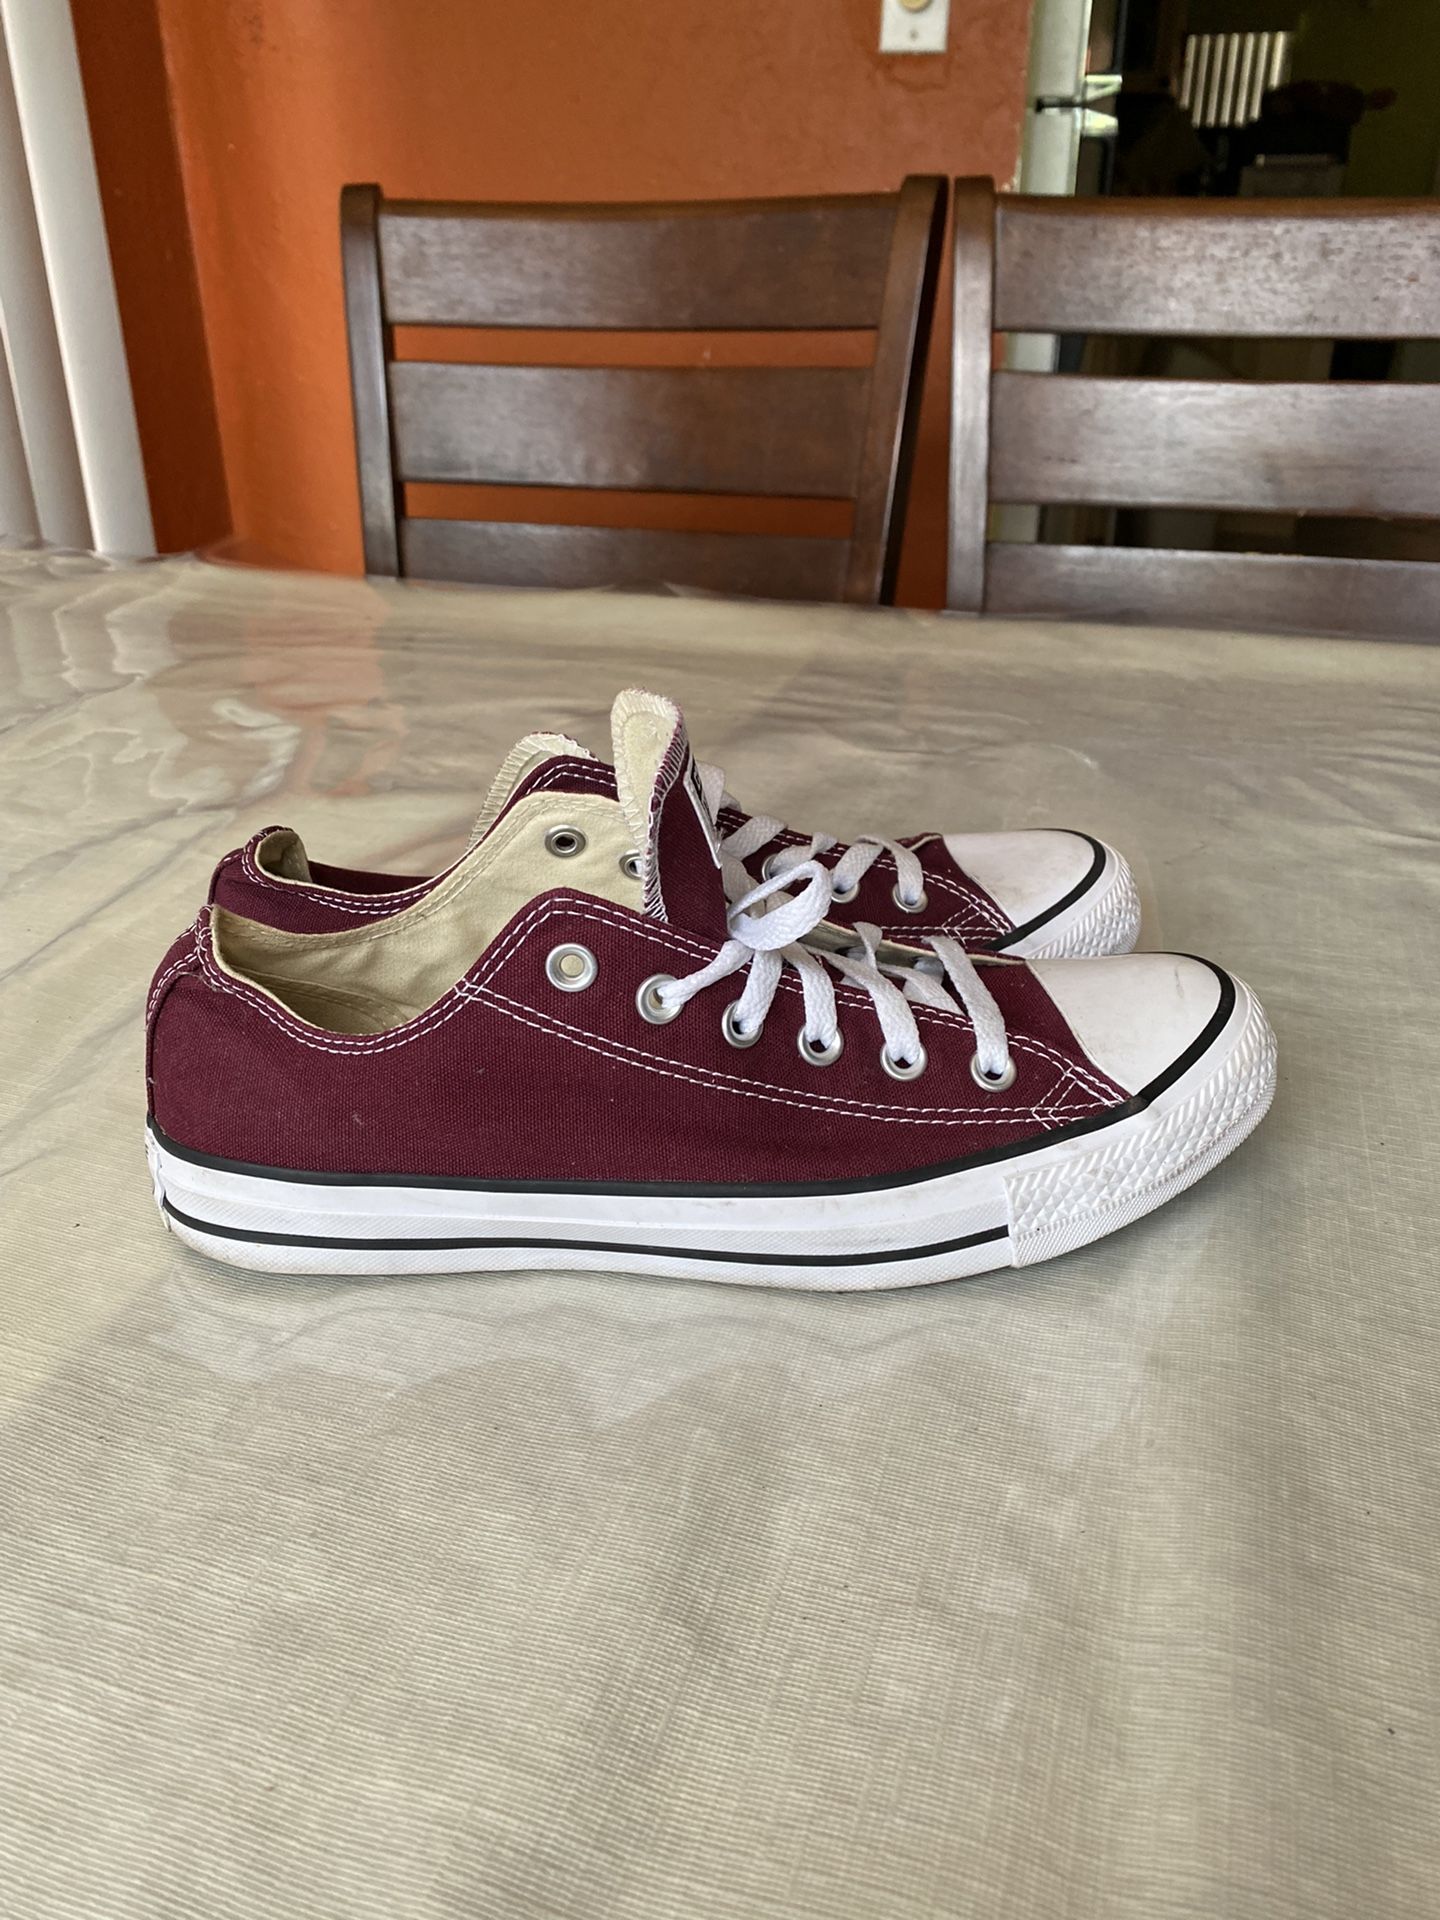 Converse Unisex All Star  Shoes Sneakers men's 8 Woman 10 35X456YW0061  Burgundary Color CZ.   Used Like New